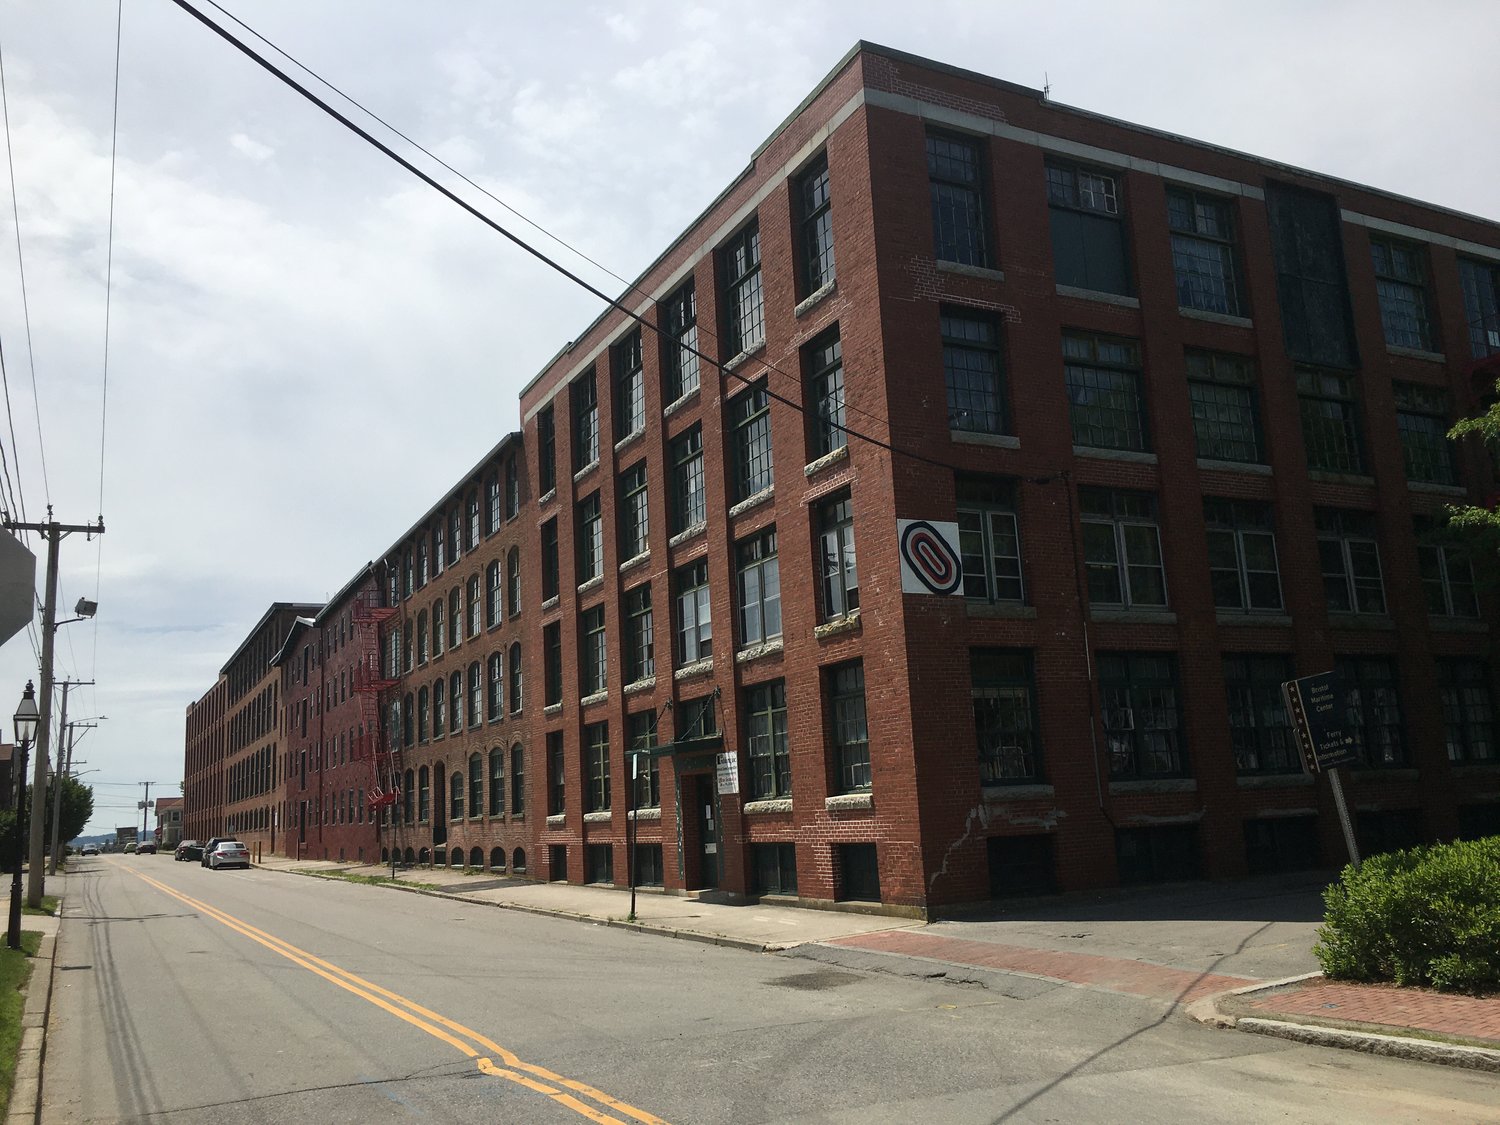 The Robin Rug mill complex at the south end of Thames Street has been the focus of redevelopment speculation for a few decades. A new proposal would create 151 apartments inside the complex.